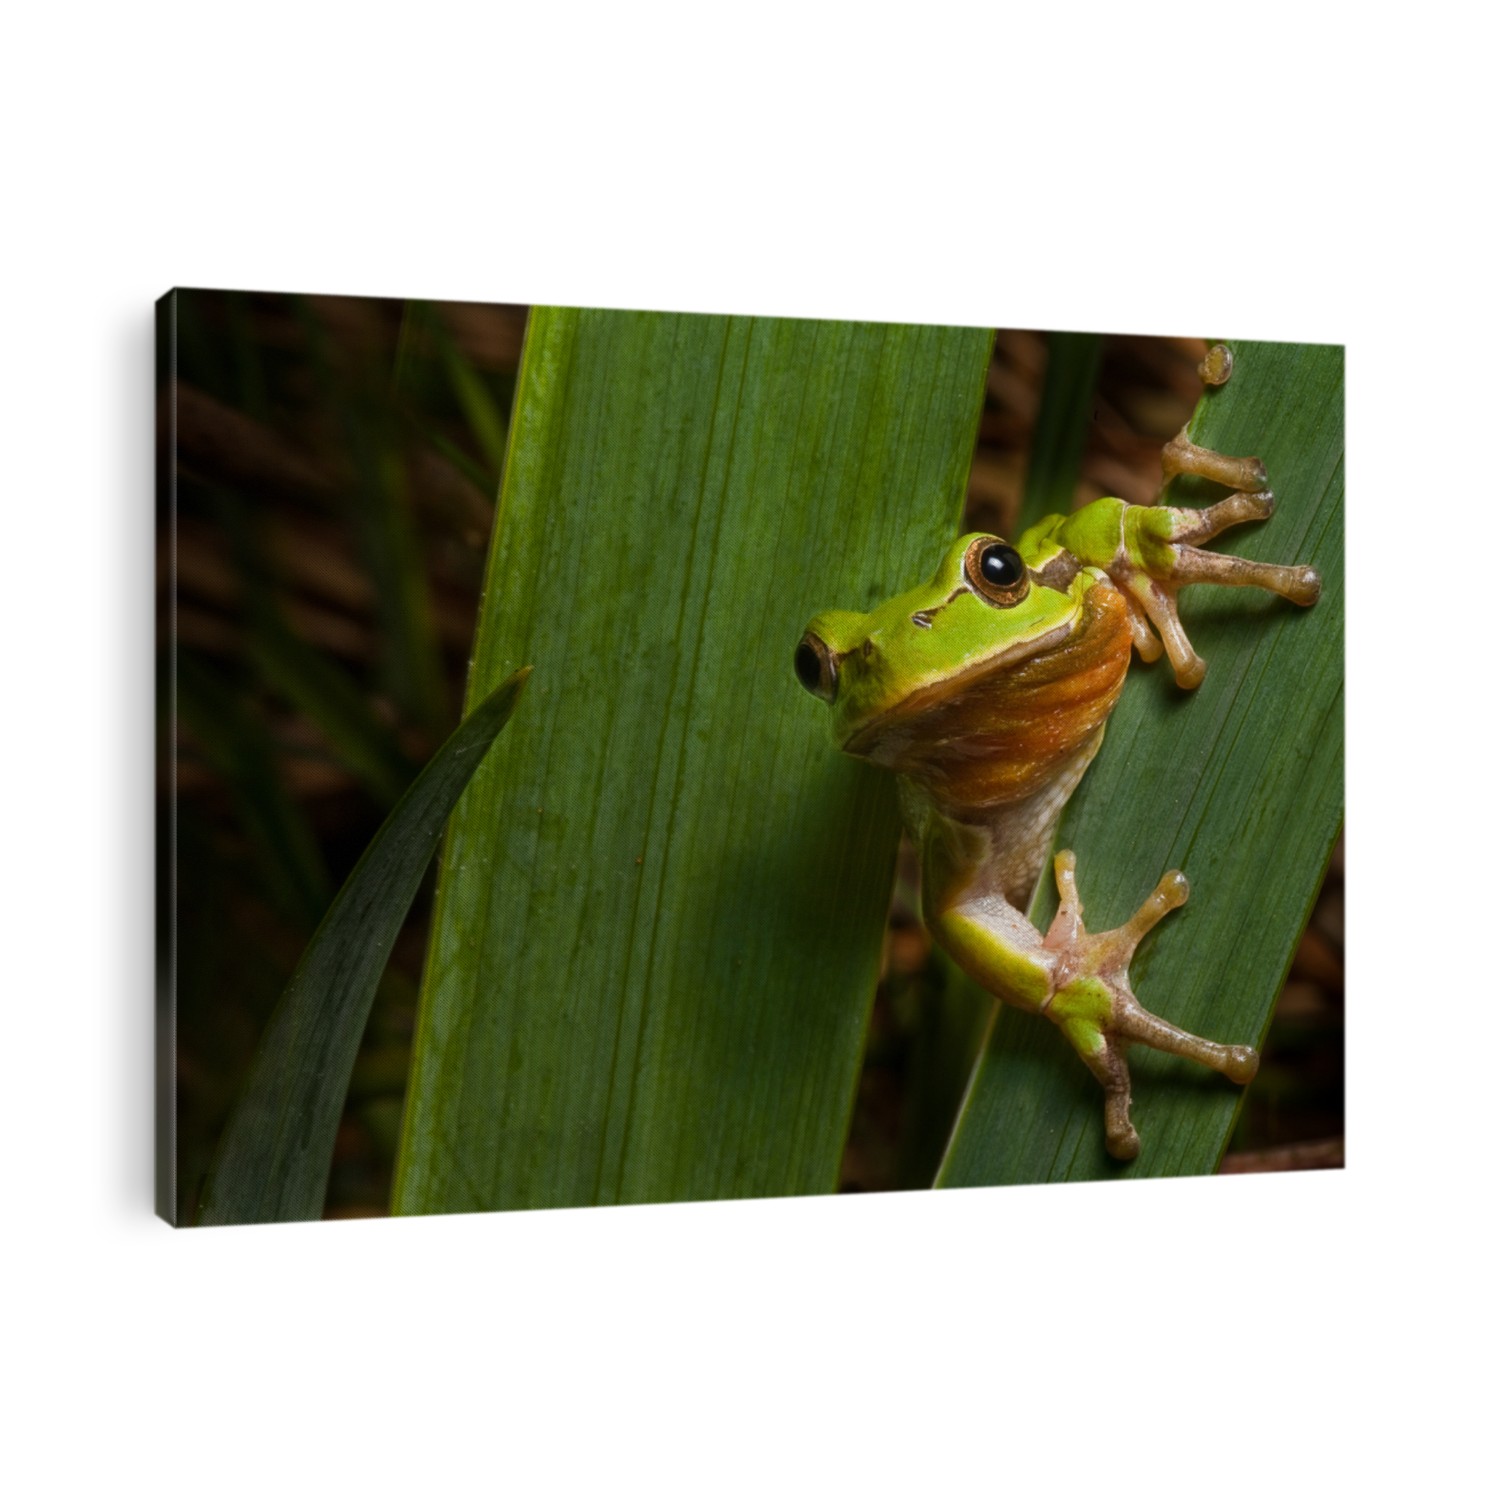 tree frog Hyla arborea sitting next to a pond green treefrog endangered european amphibian macro with copy space  nocturnal night animal climbing on leaf